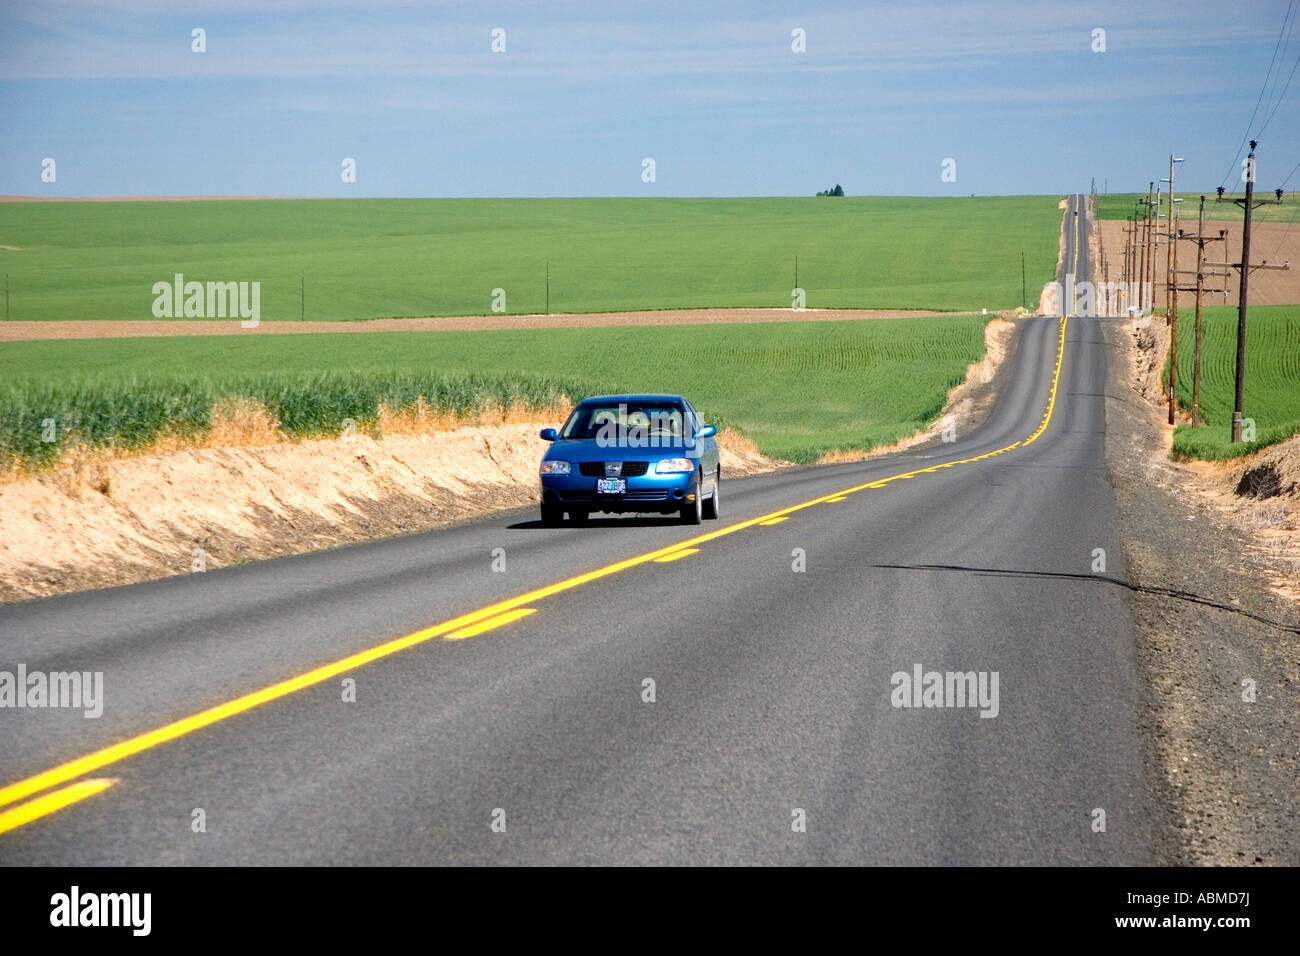 Car traveling on a country road surrounded by green unripe wheat fields near Pendleton Oregon Stock Photo